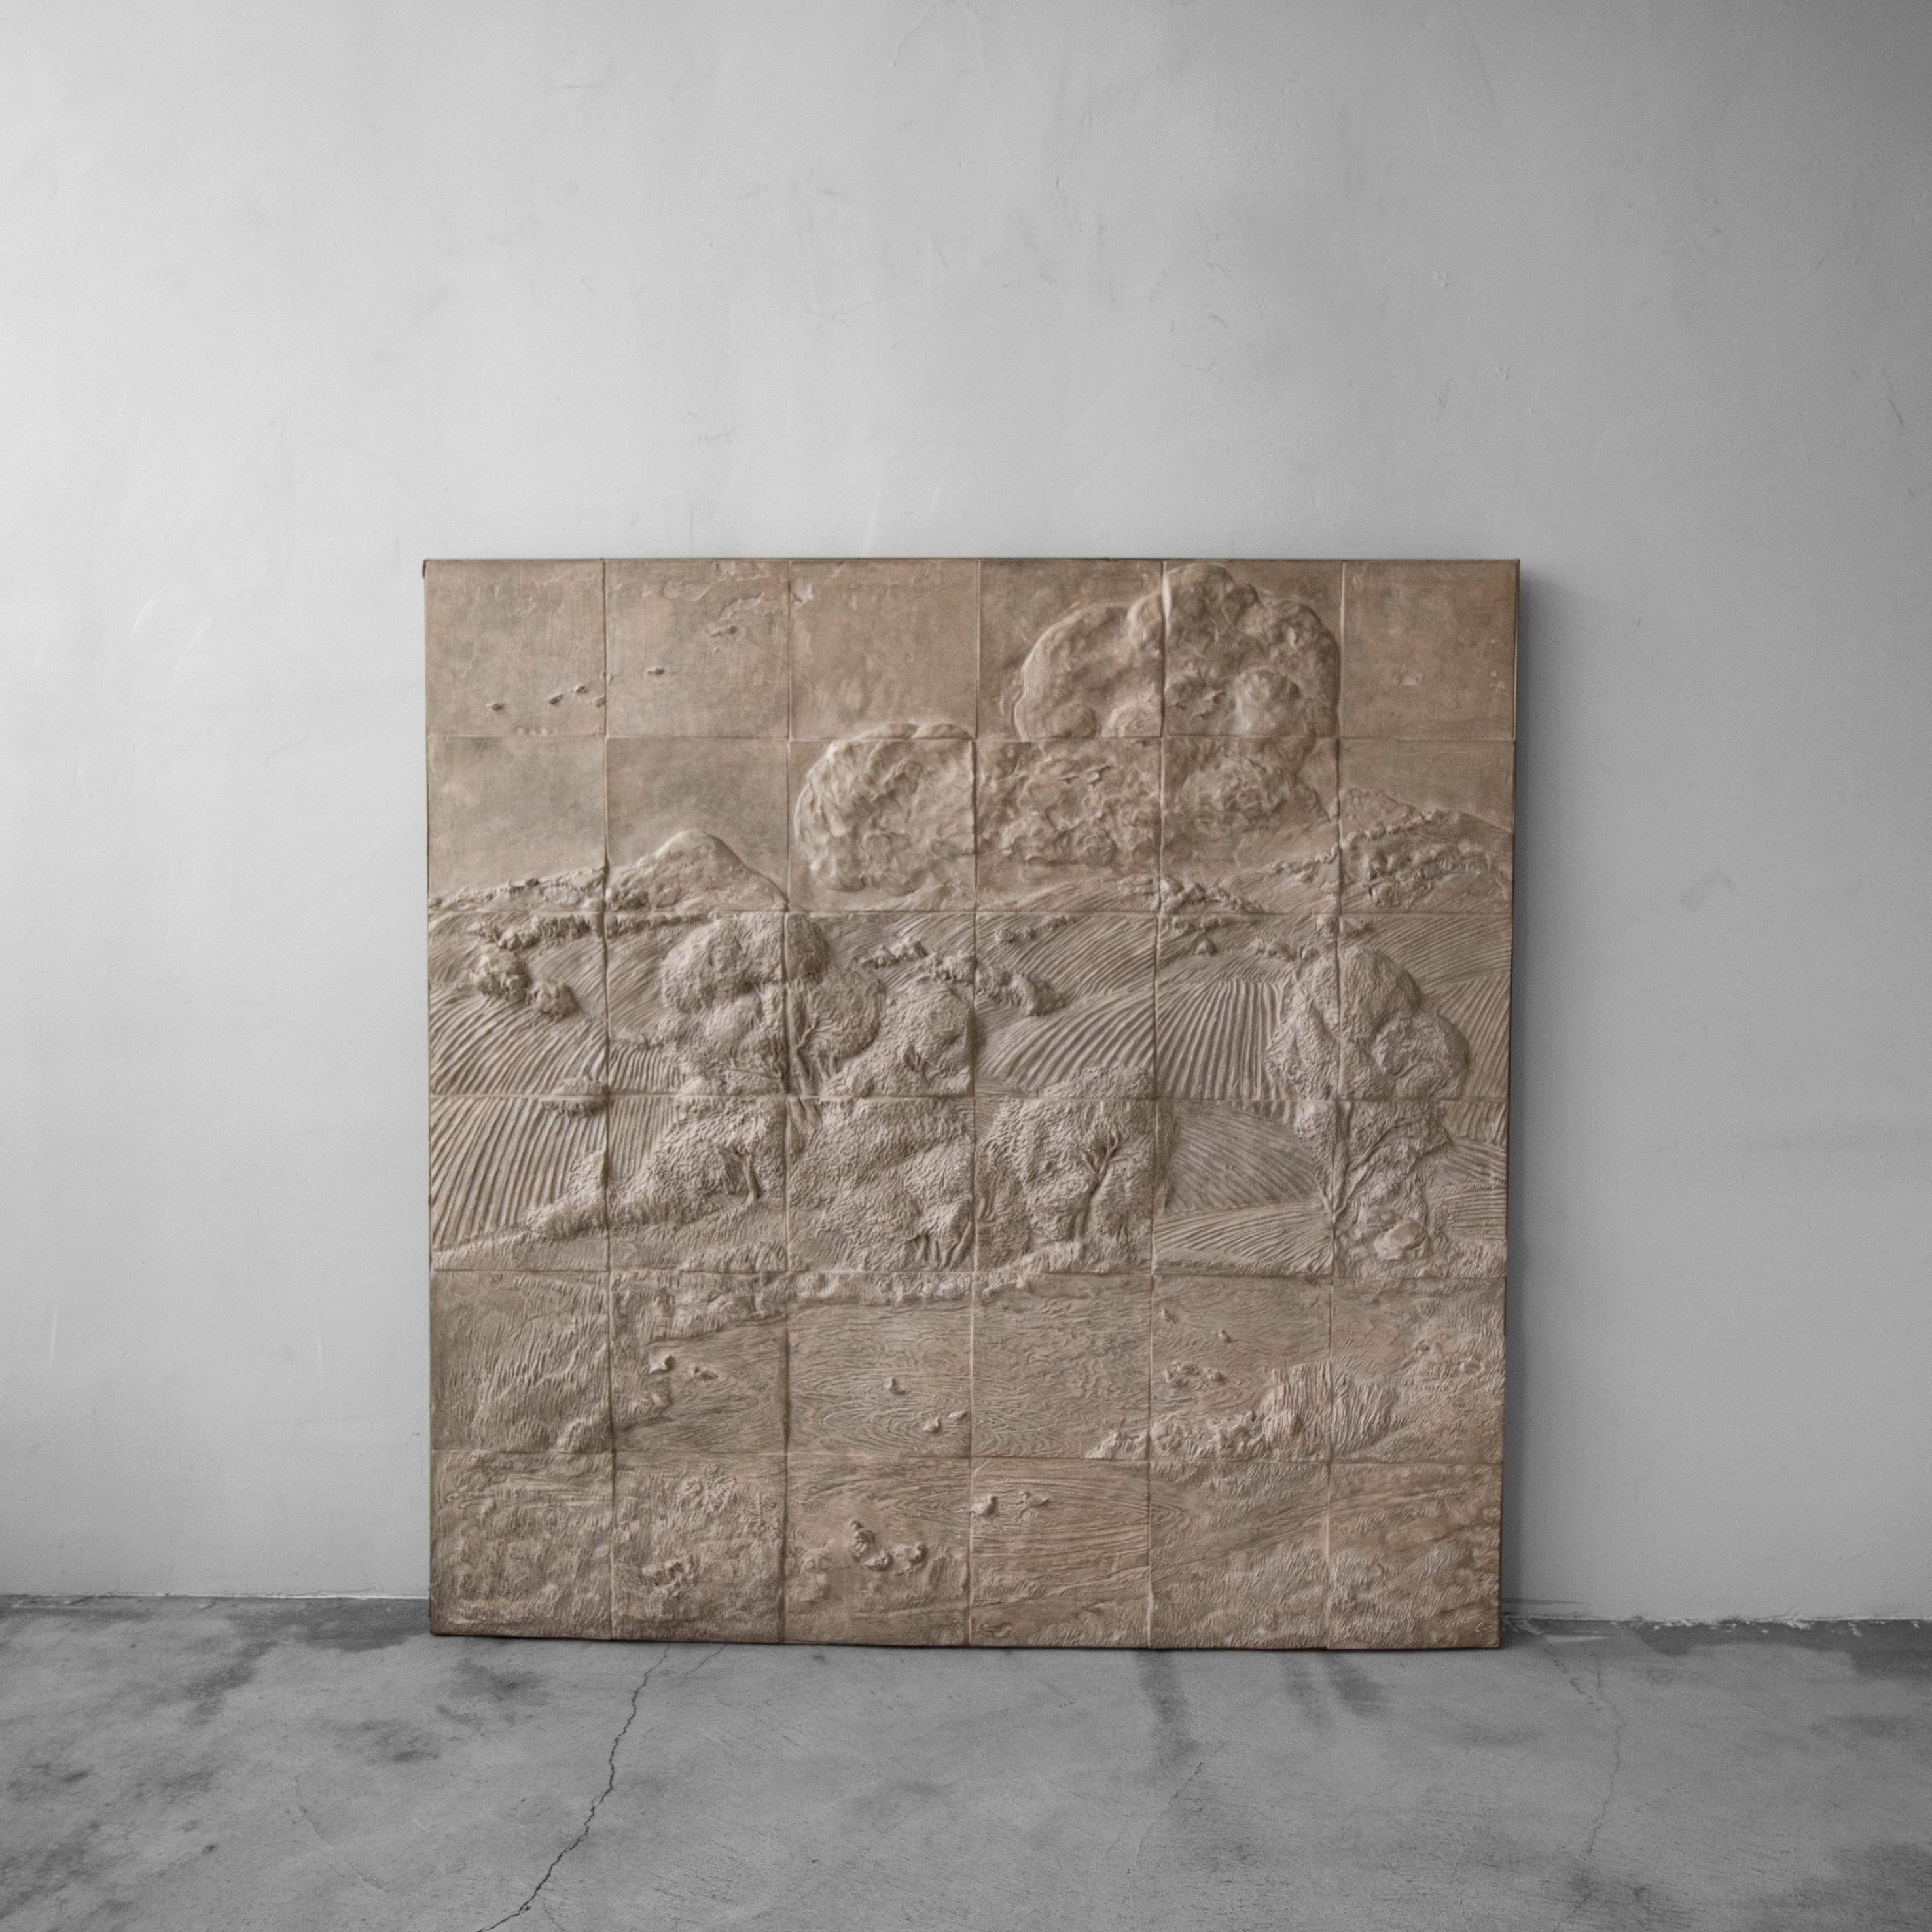 Incredible. There are no words to describe this piece. At almost 5 ft. square, it is very large. It is composed of 36 intricately, handcrafted relief art tiles arranged to form a beautiful, abstract landscape. This is the epitome of art, it would